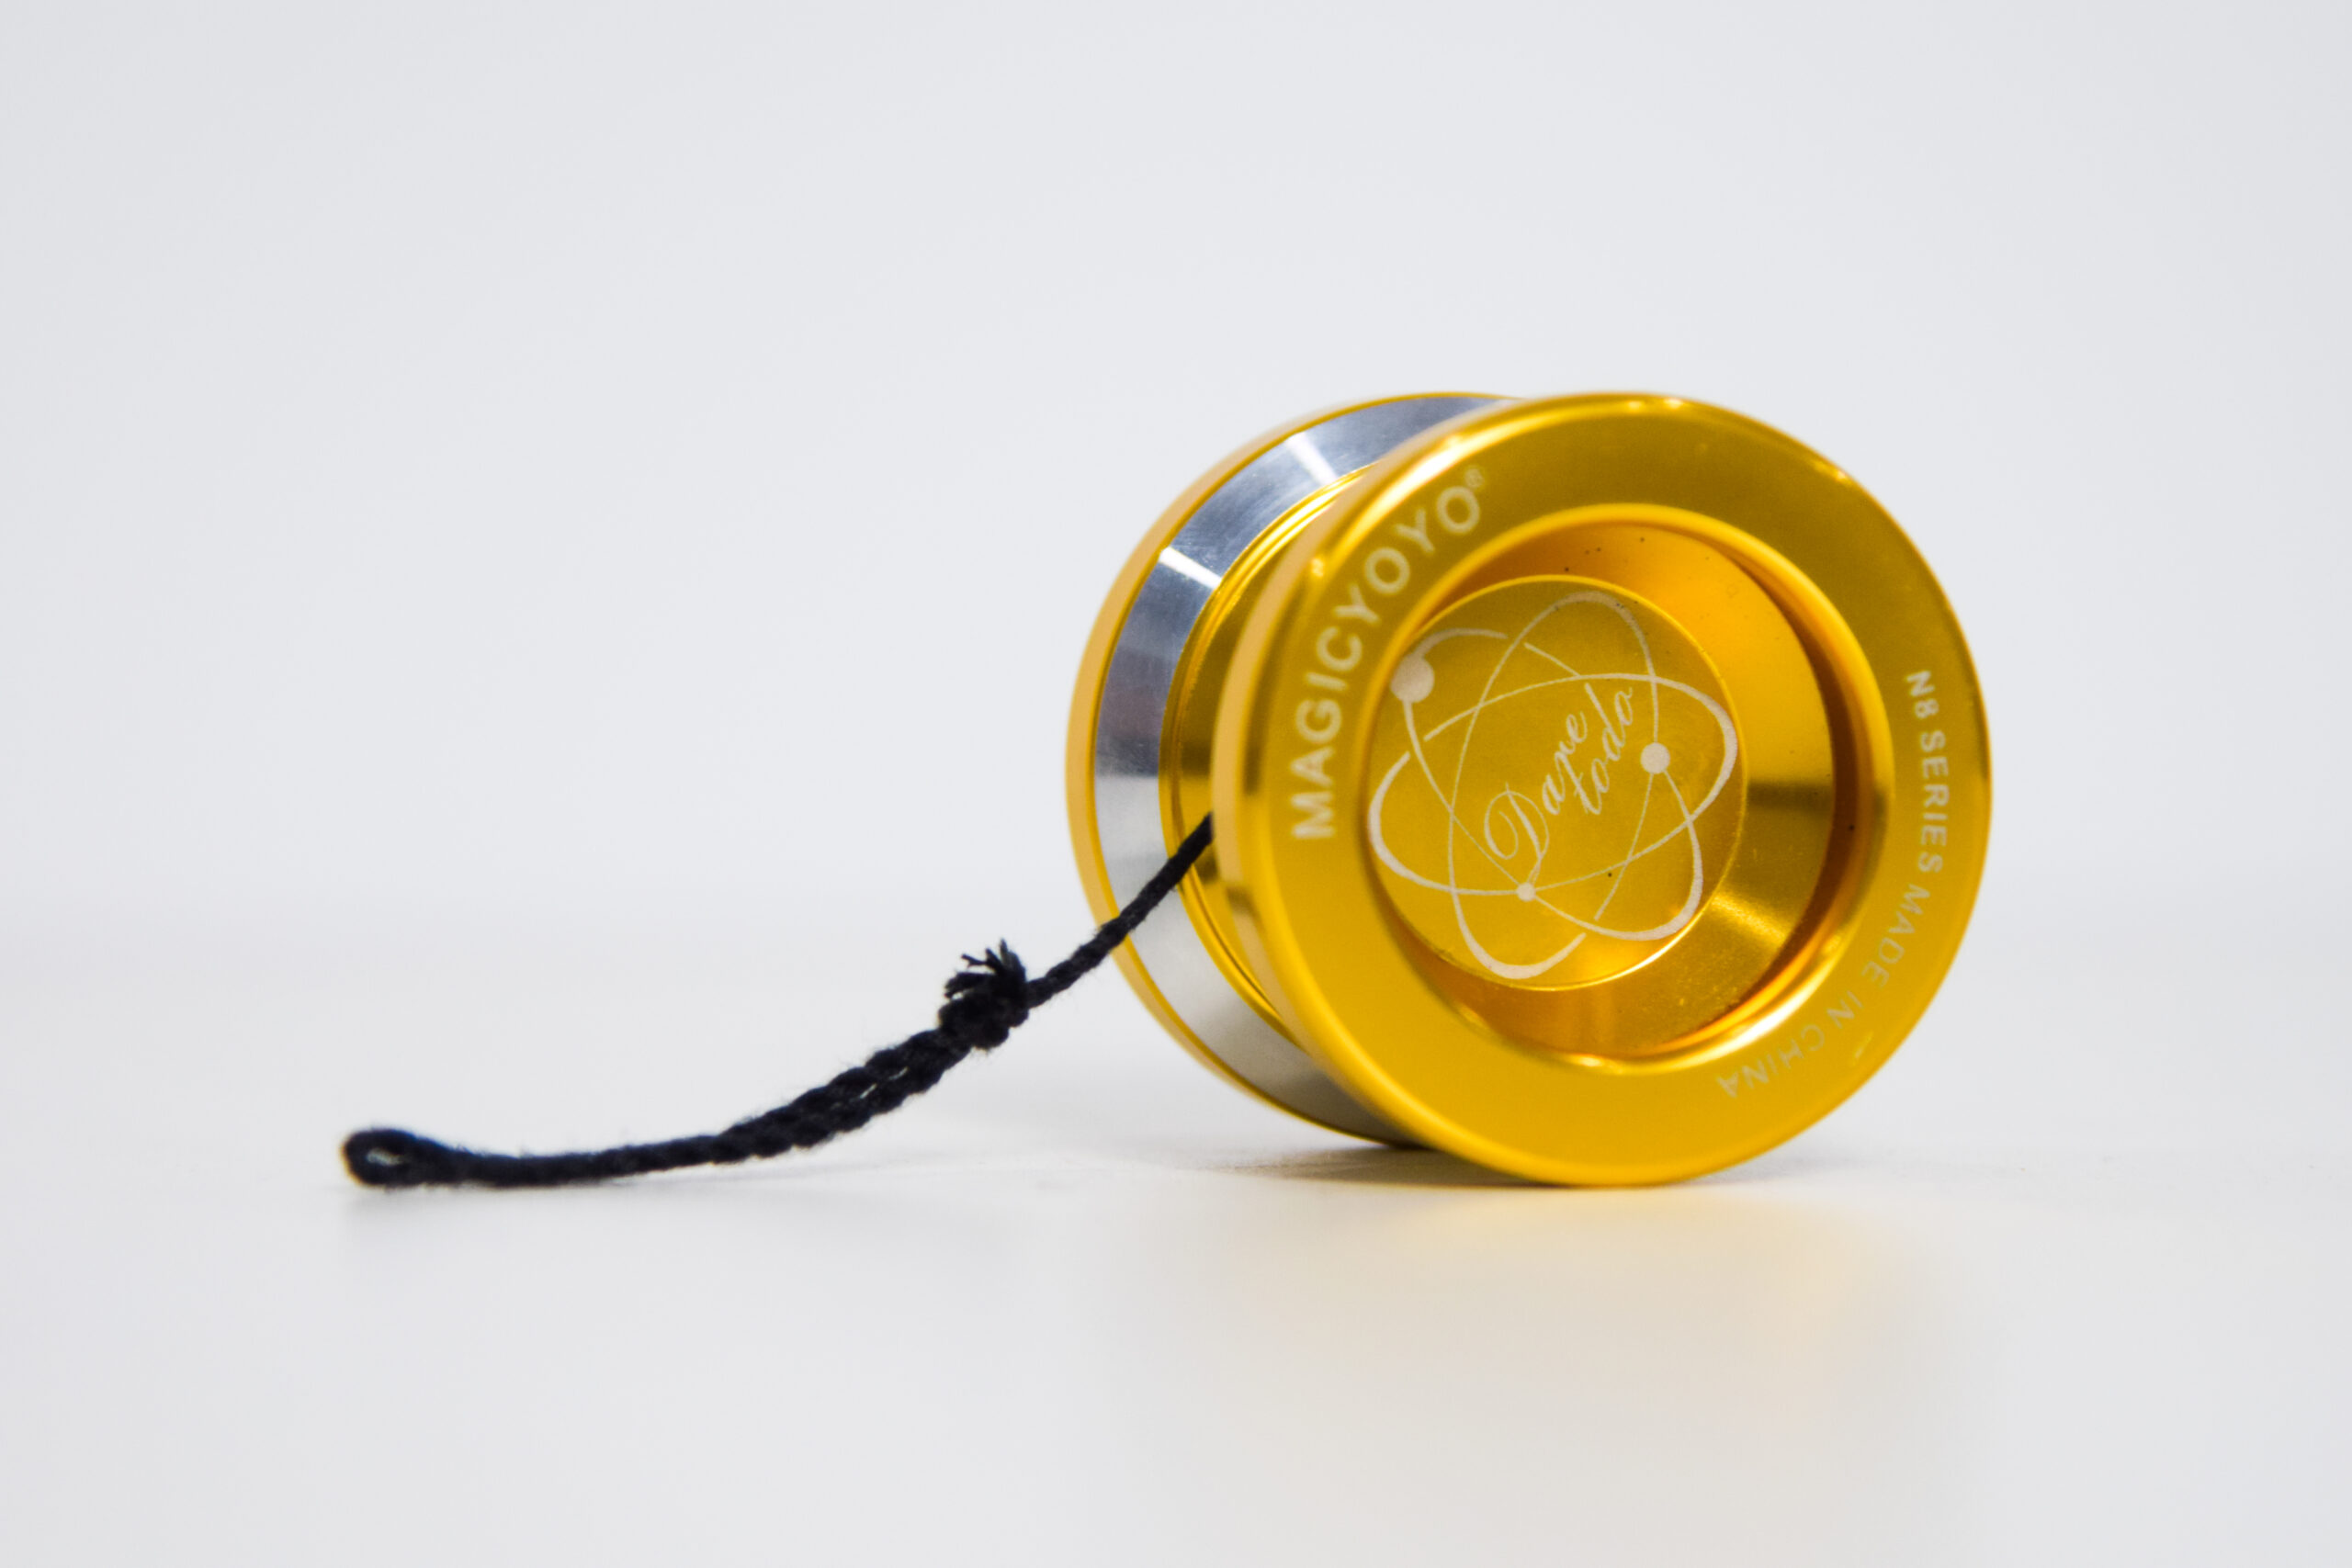 How do yo-yos work? The science and physics of the yo-yo toy